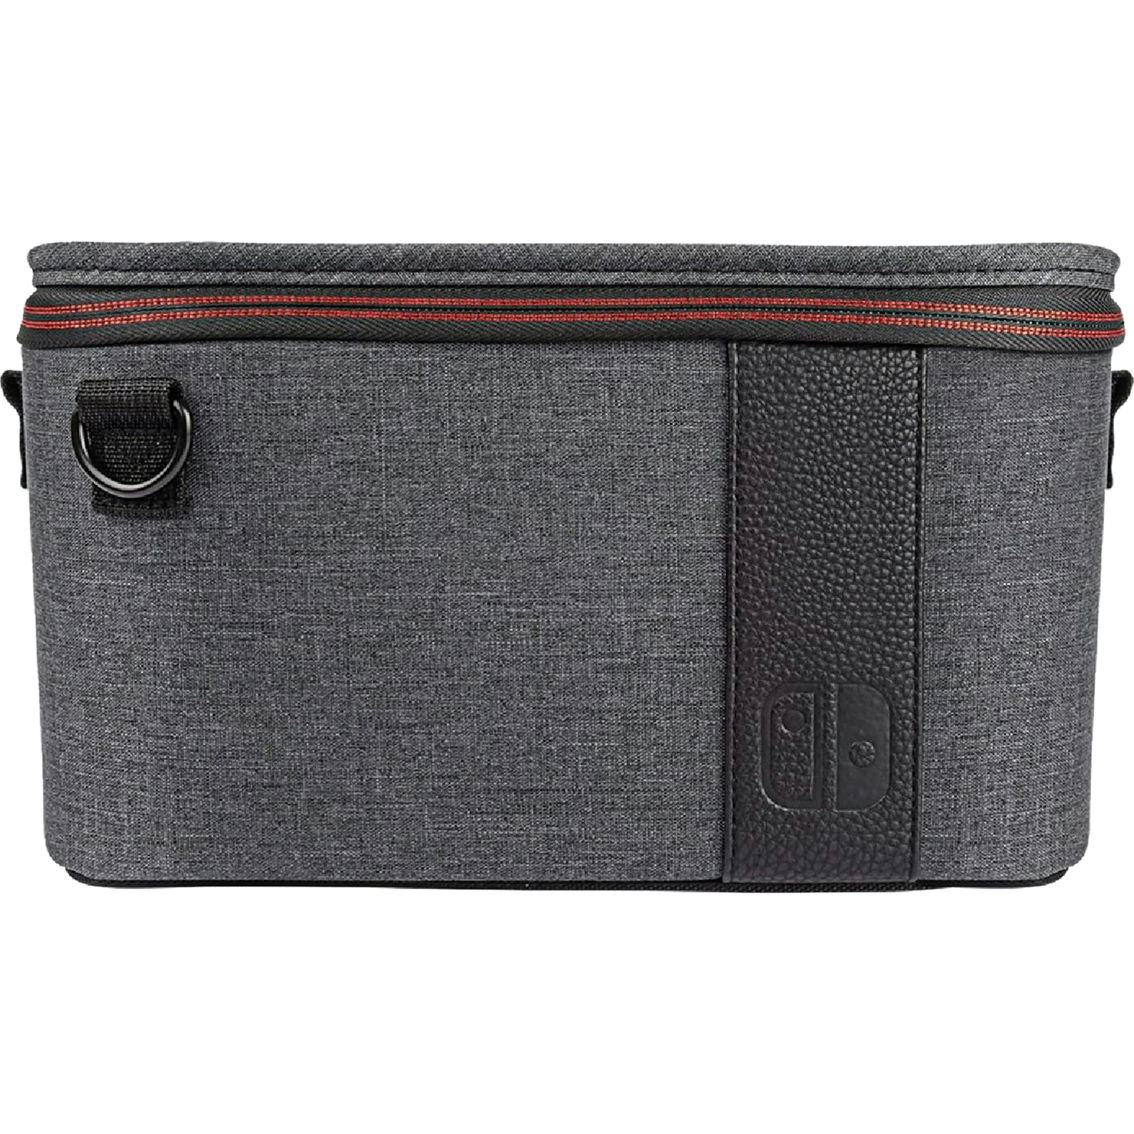 PDP Gaming Pull-N-Go Case: Elite Edition - Nintendo Switch - Image 3 of 9